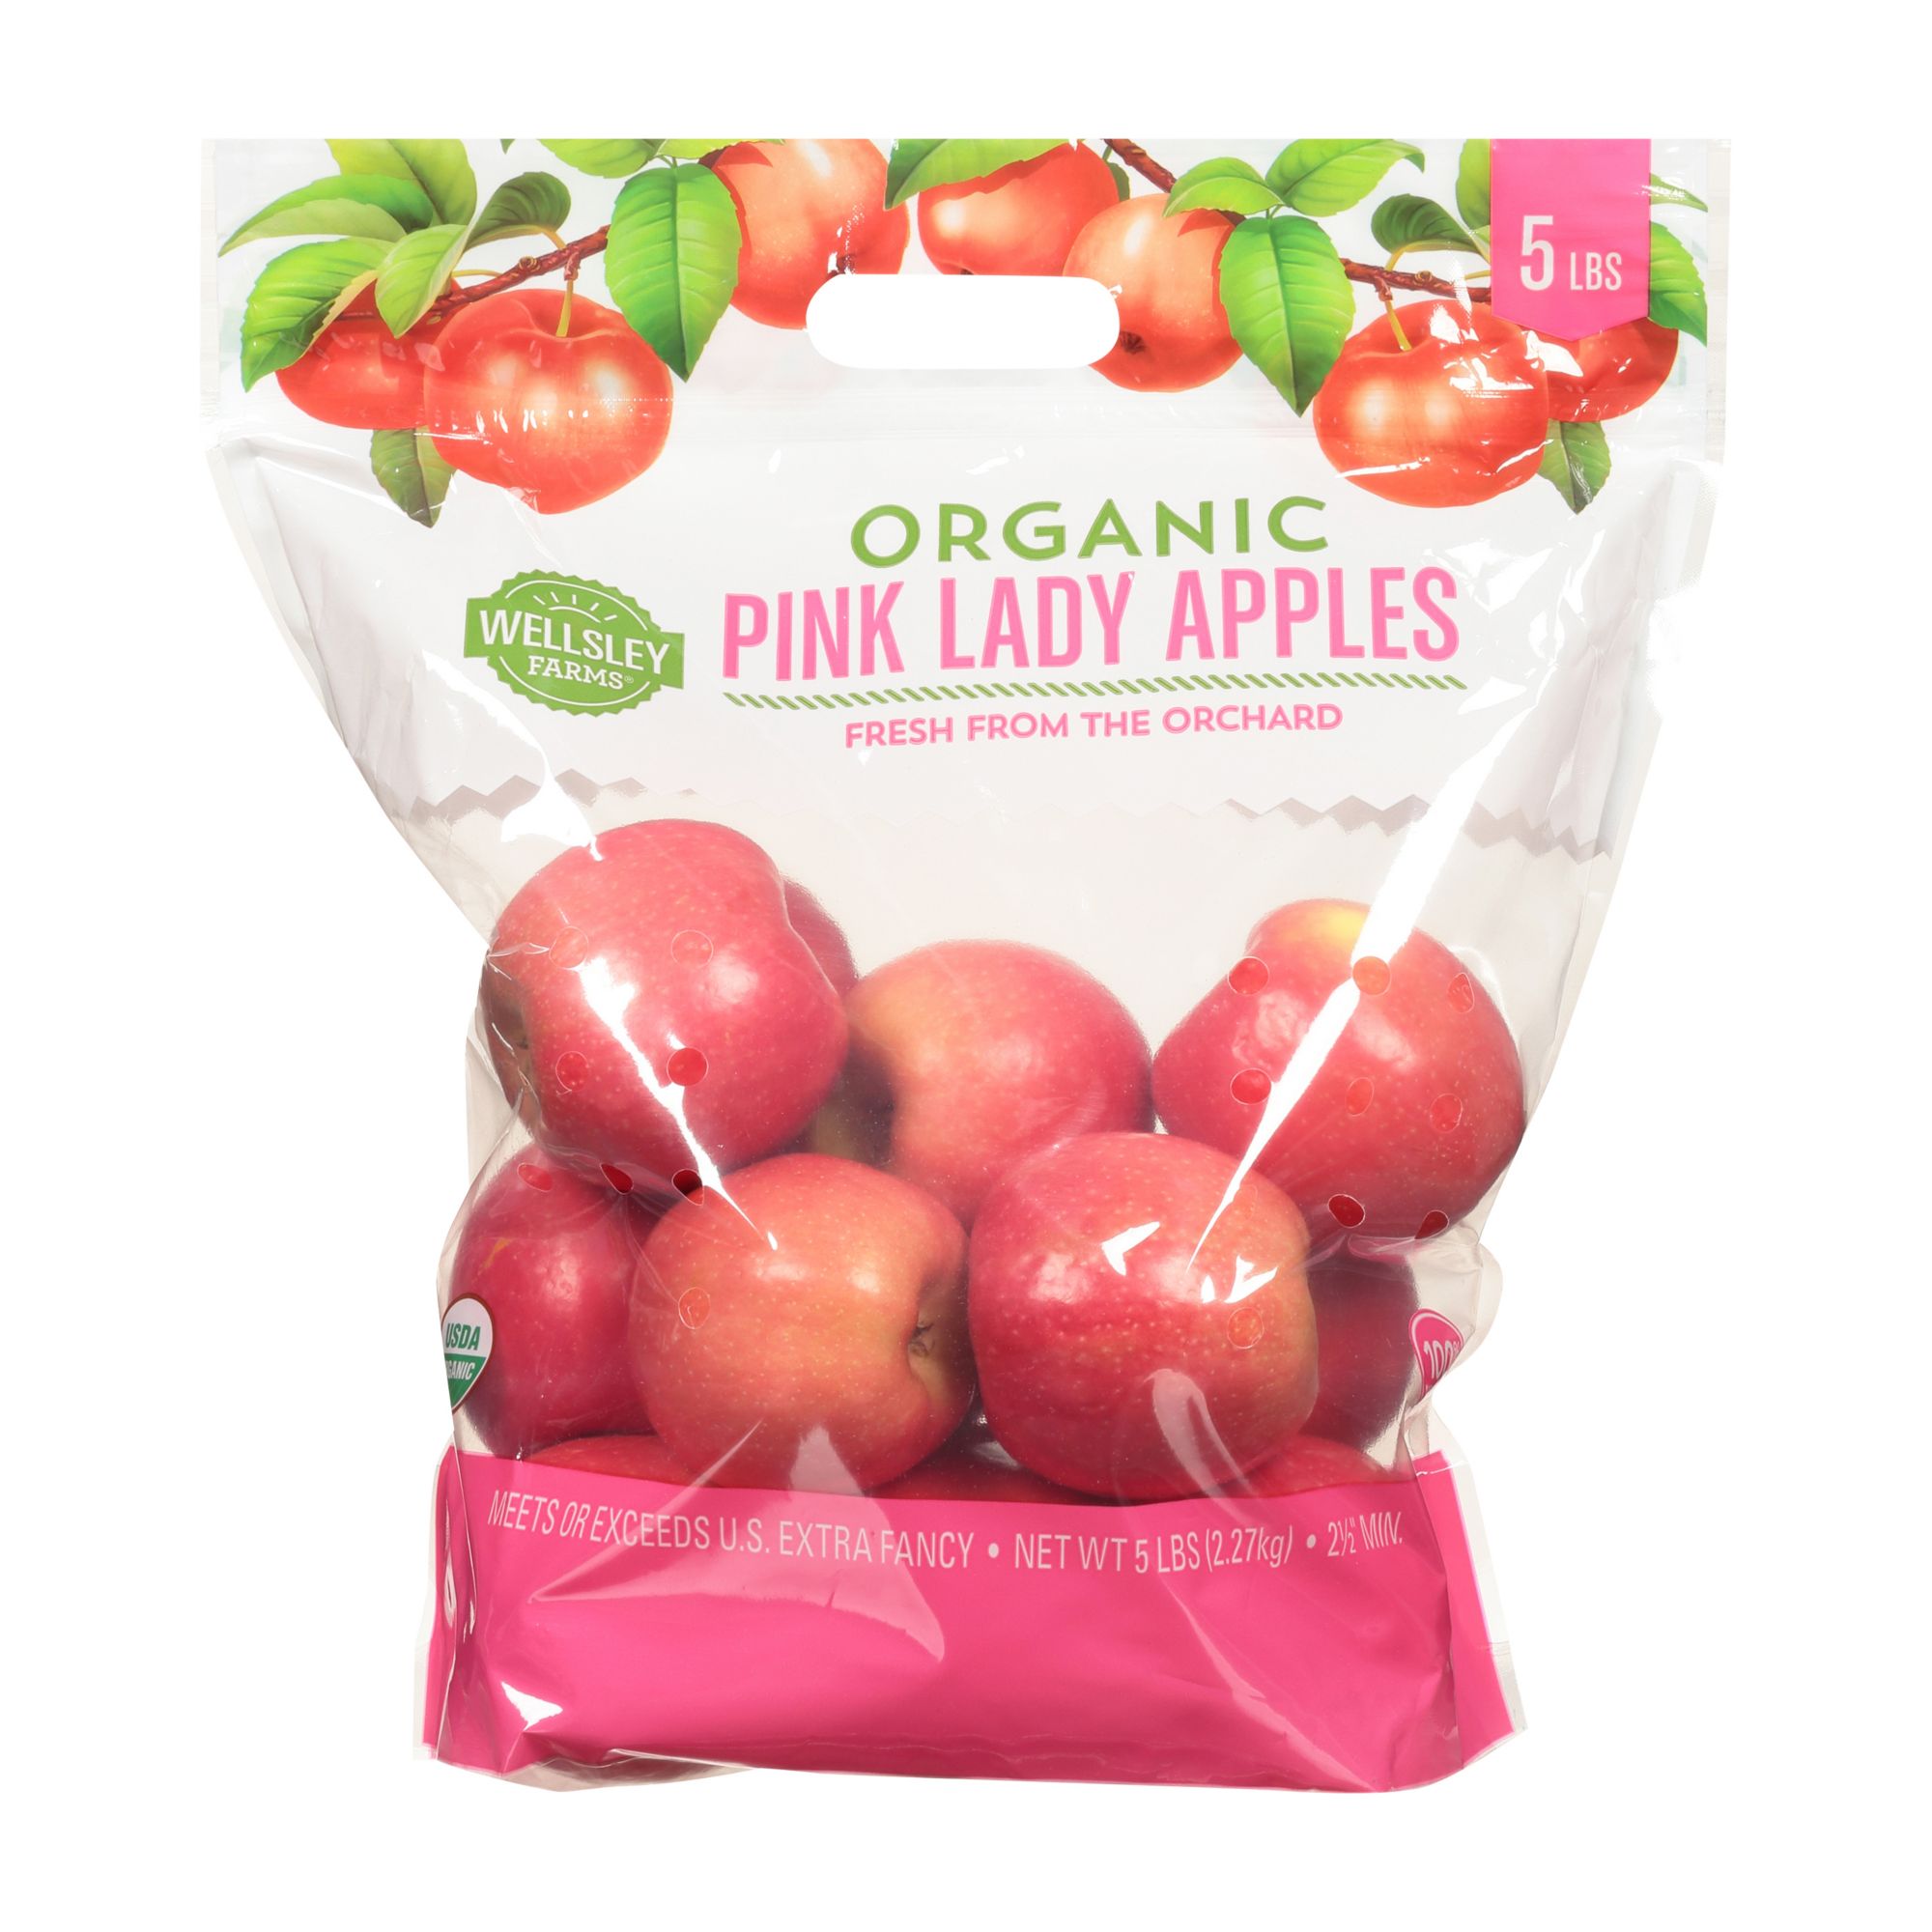 Fresh Red Delicious Apples, 5 lb Bag